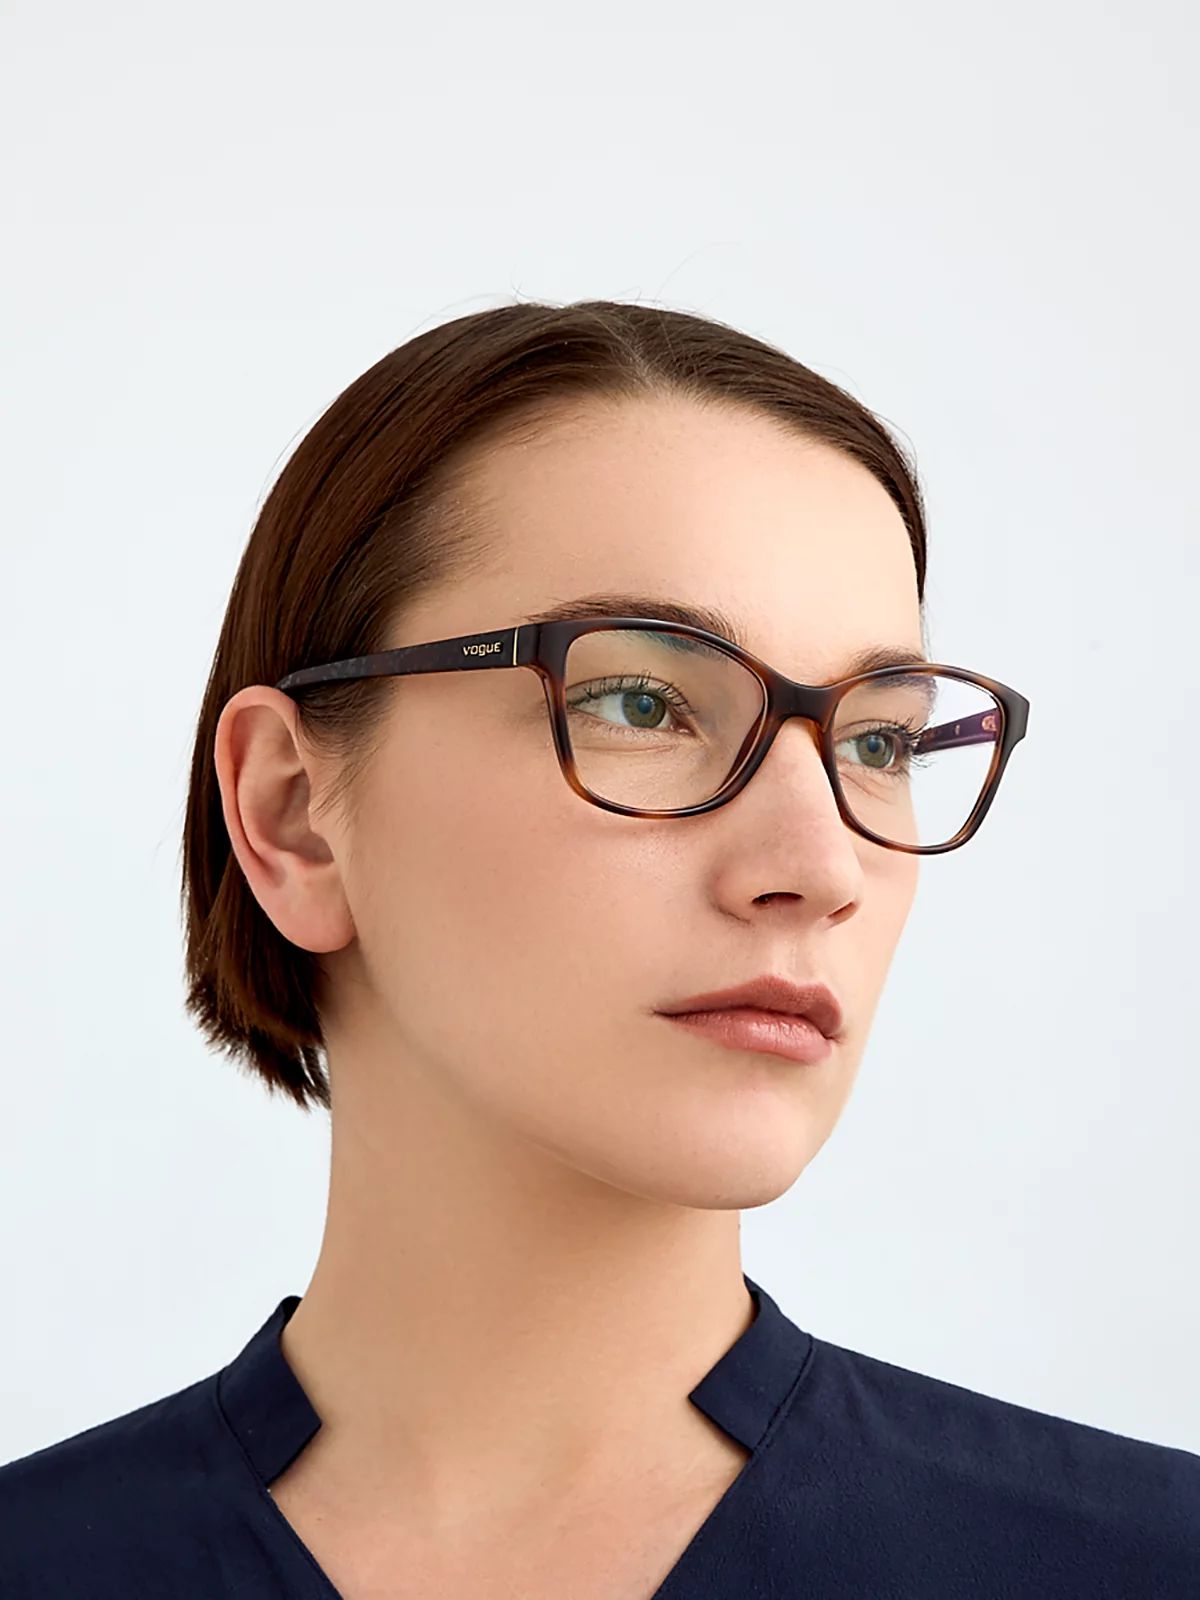 Try-on the VOGUE EYEWEAR VO2998 at glasses.com | Glasses.com